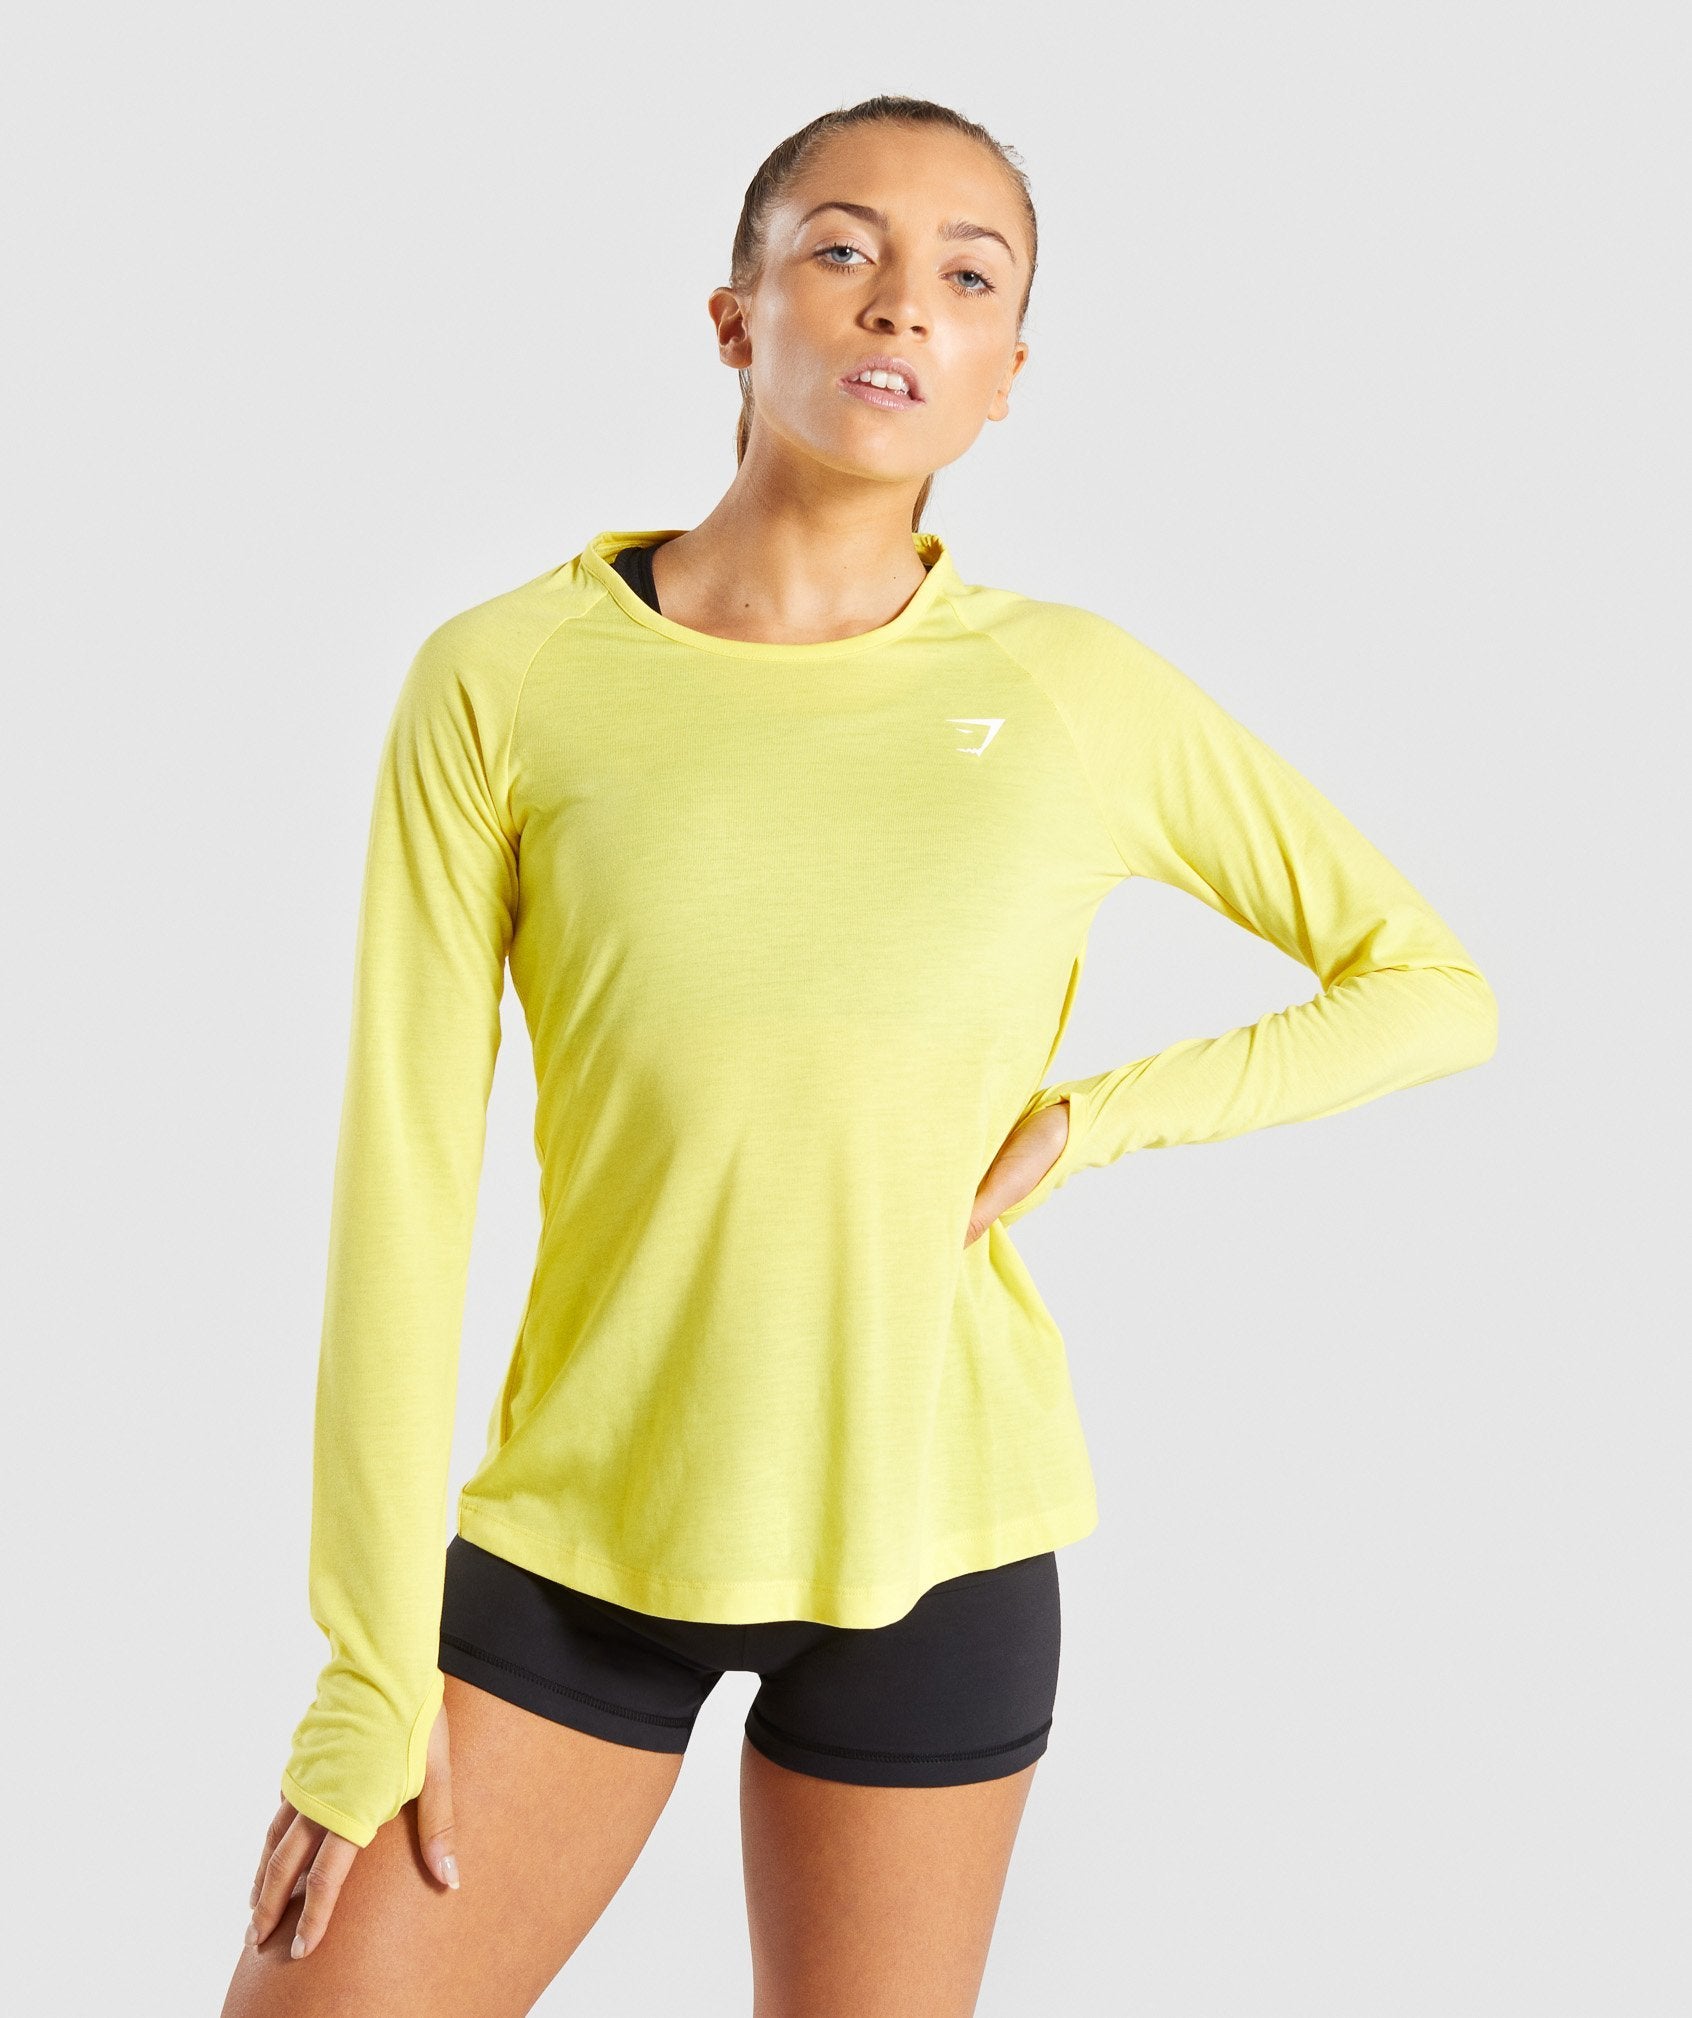 Primary Open Cross Back Long Sleeve in Pop Yellow - view 1